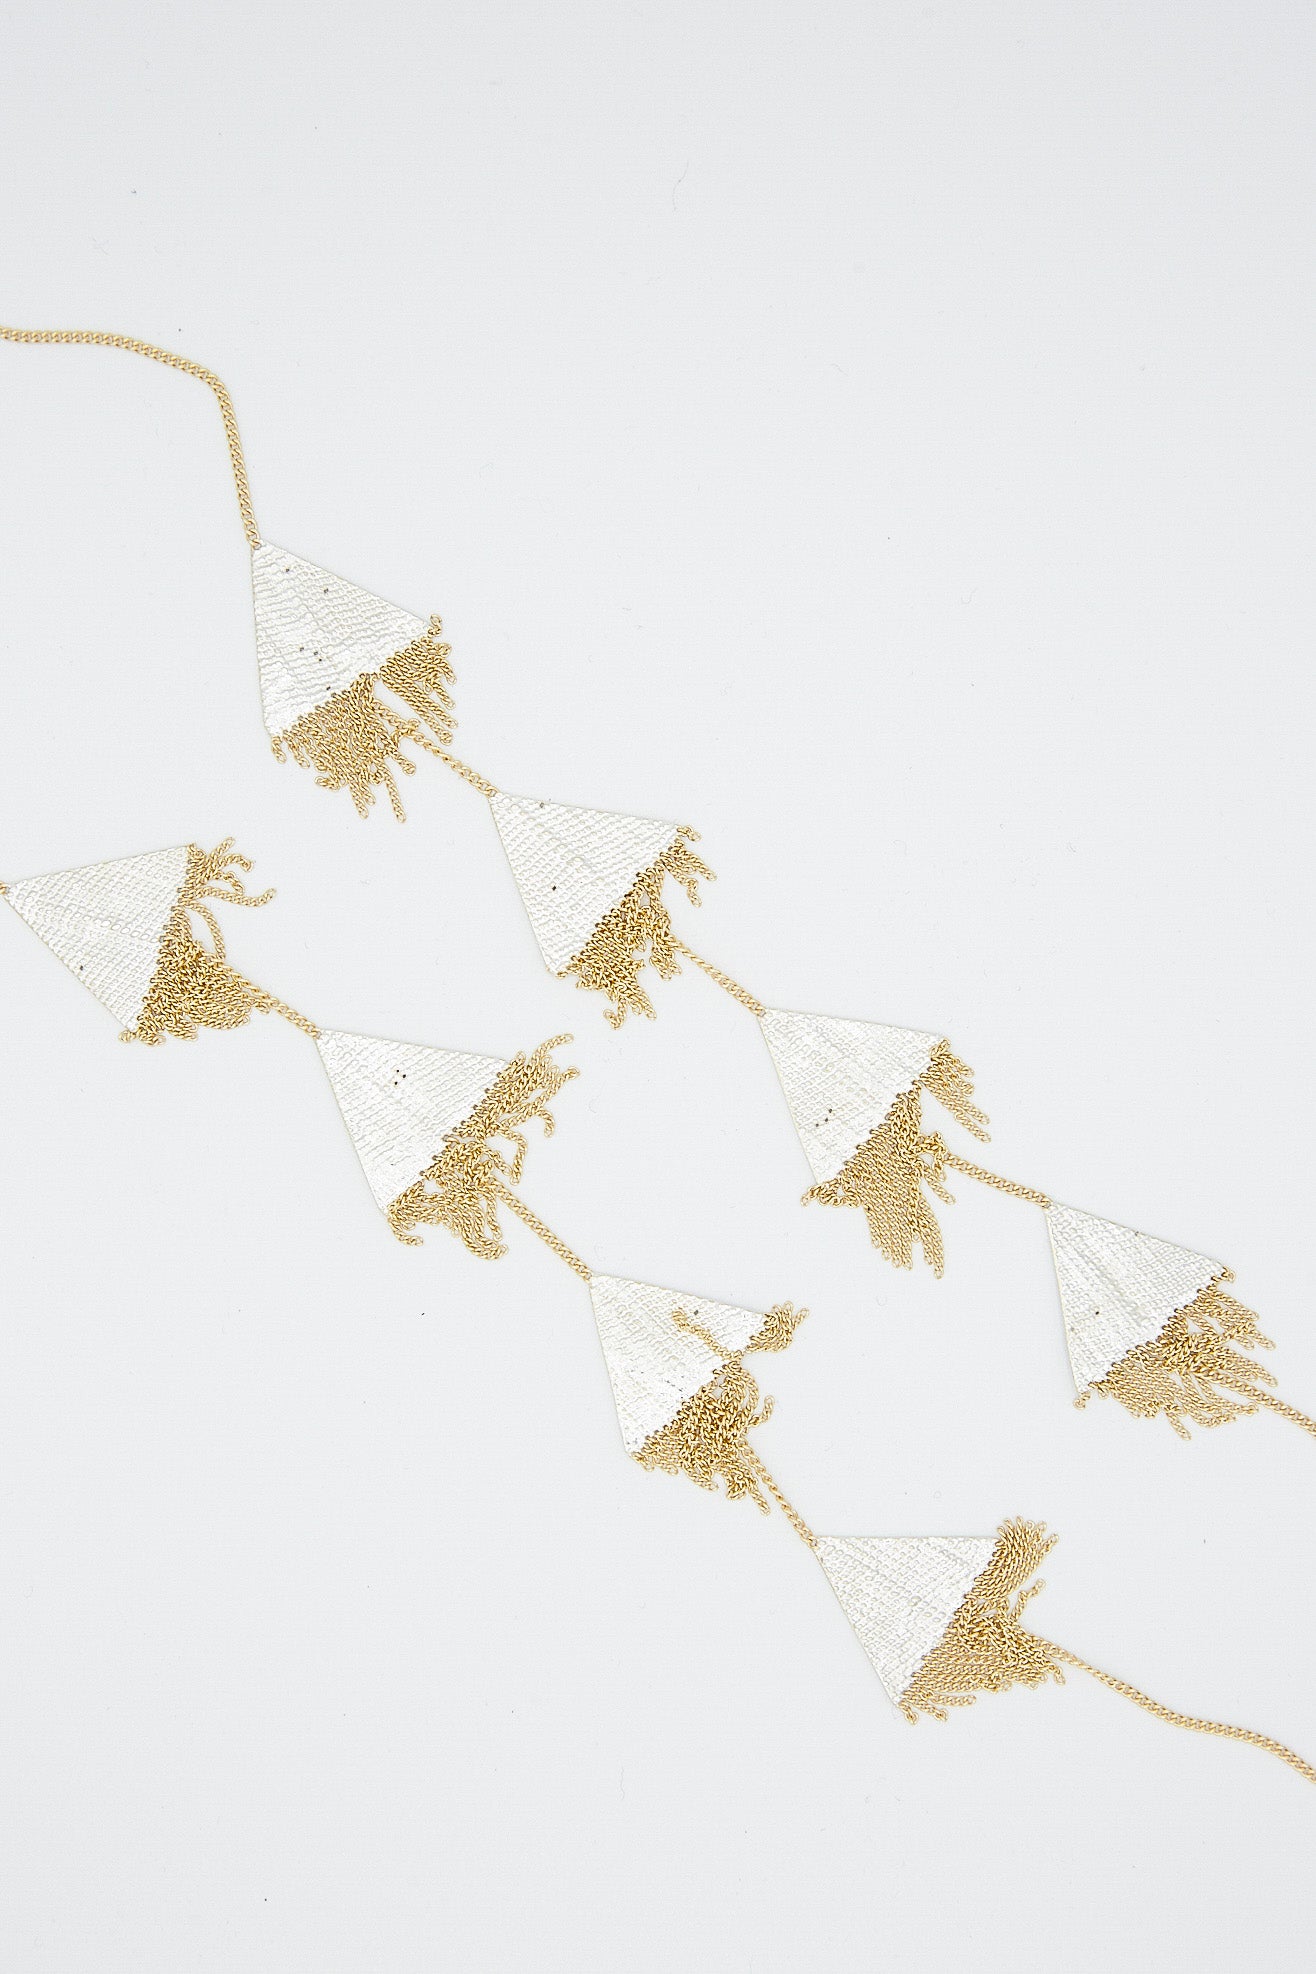 A handmade Triangle Necklace in Brass Chain and Silver Solder by Hannah Keefe, with tassels and featuring silver soldered brass elements and geometric forms.